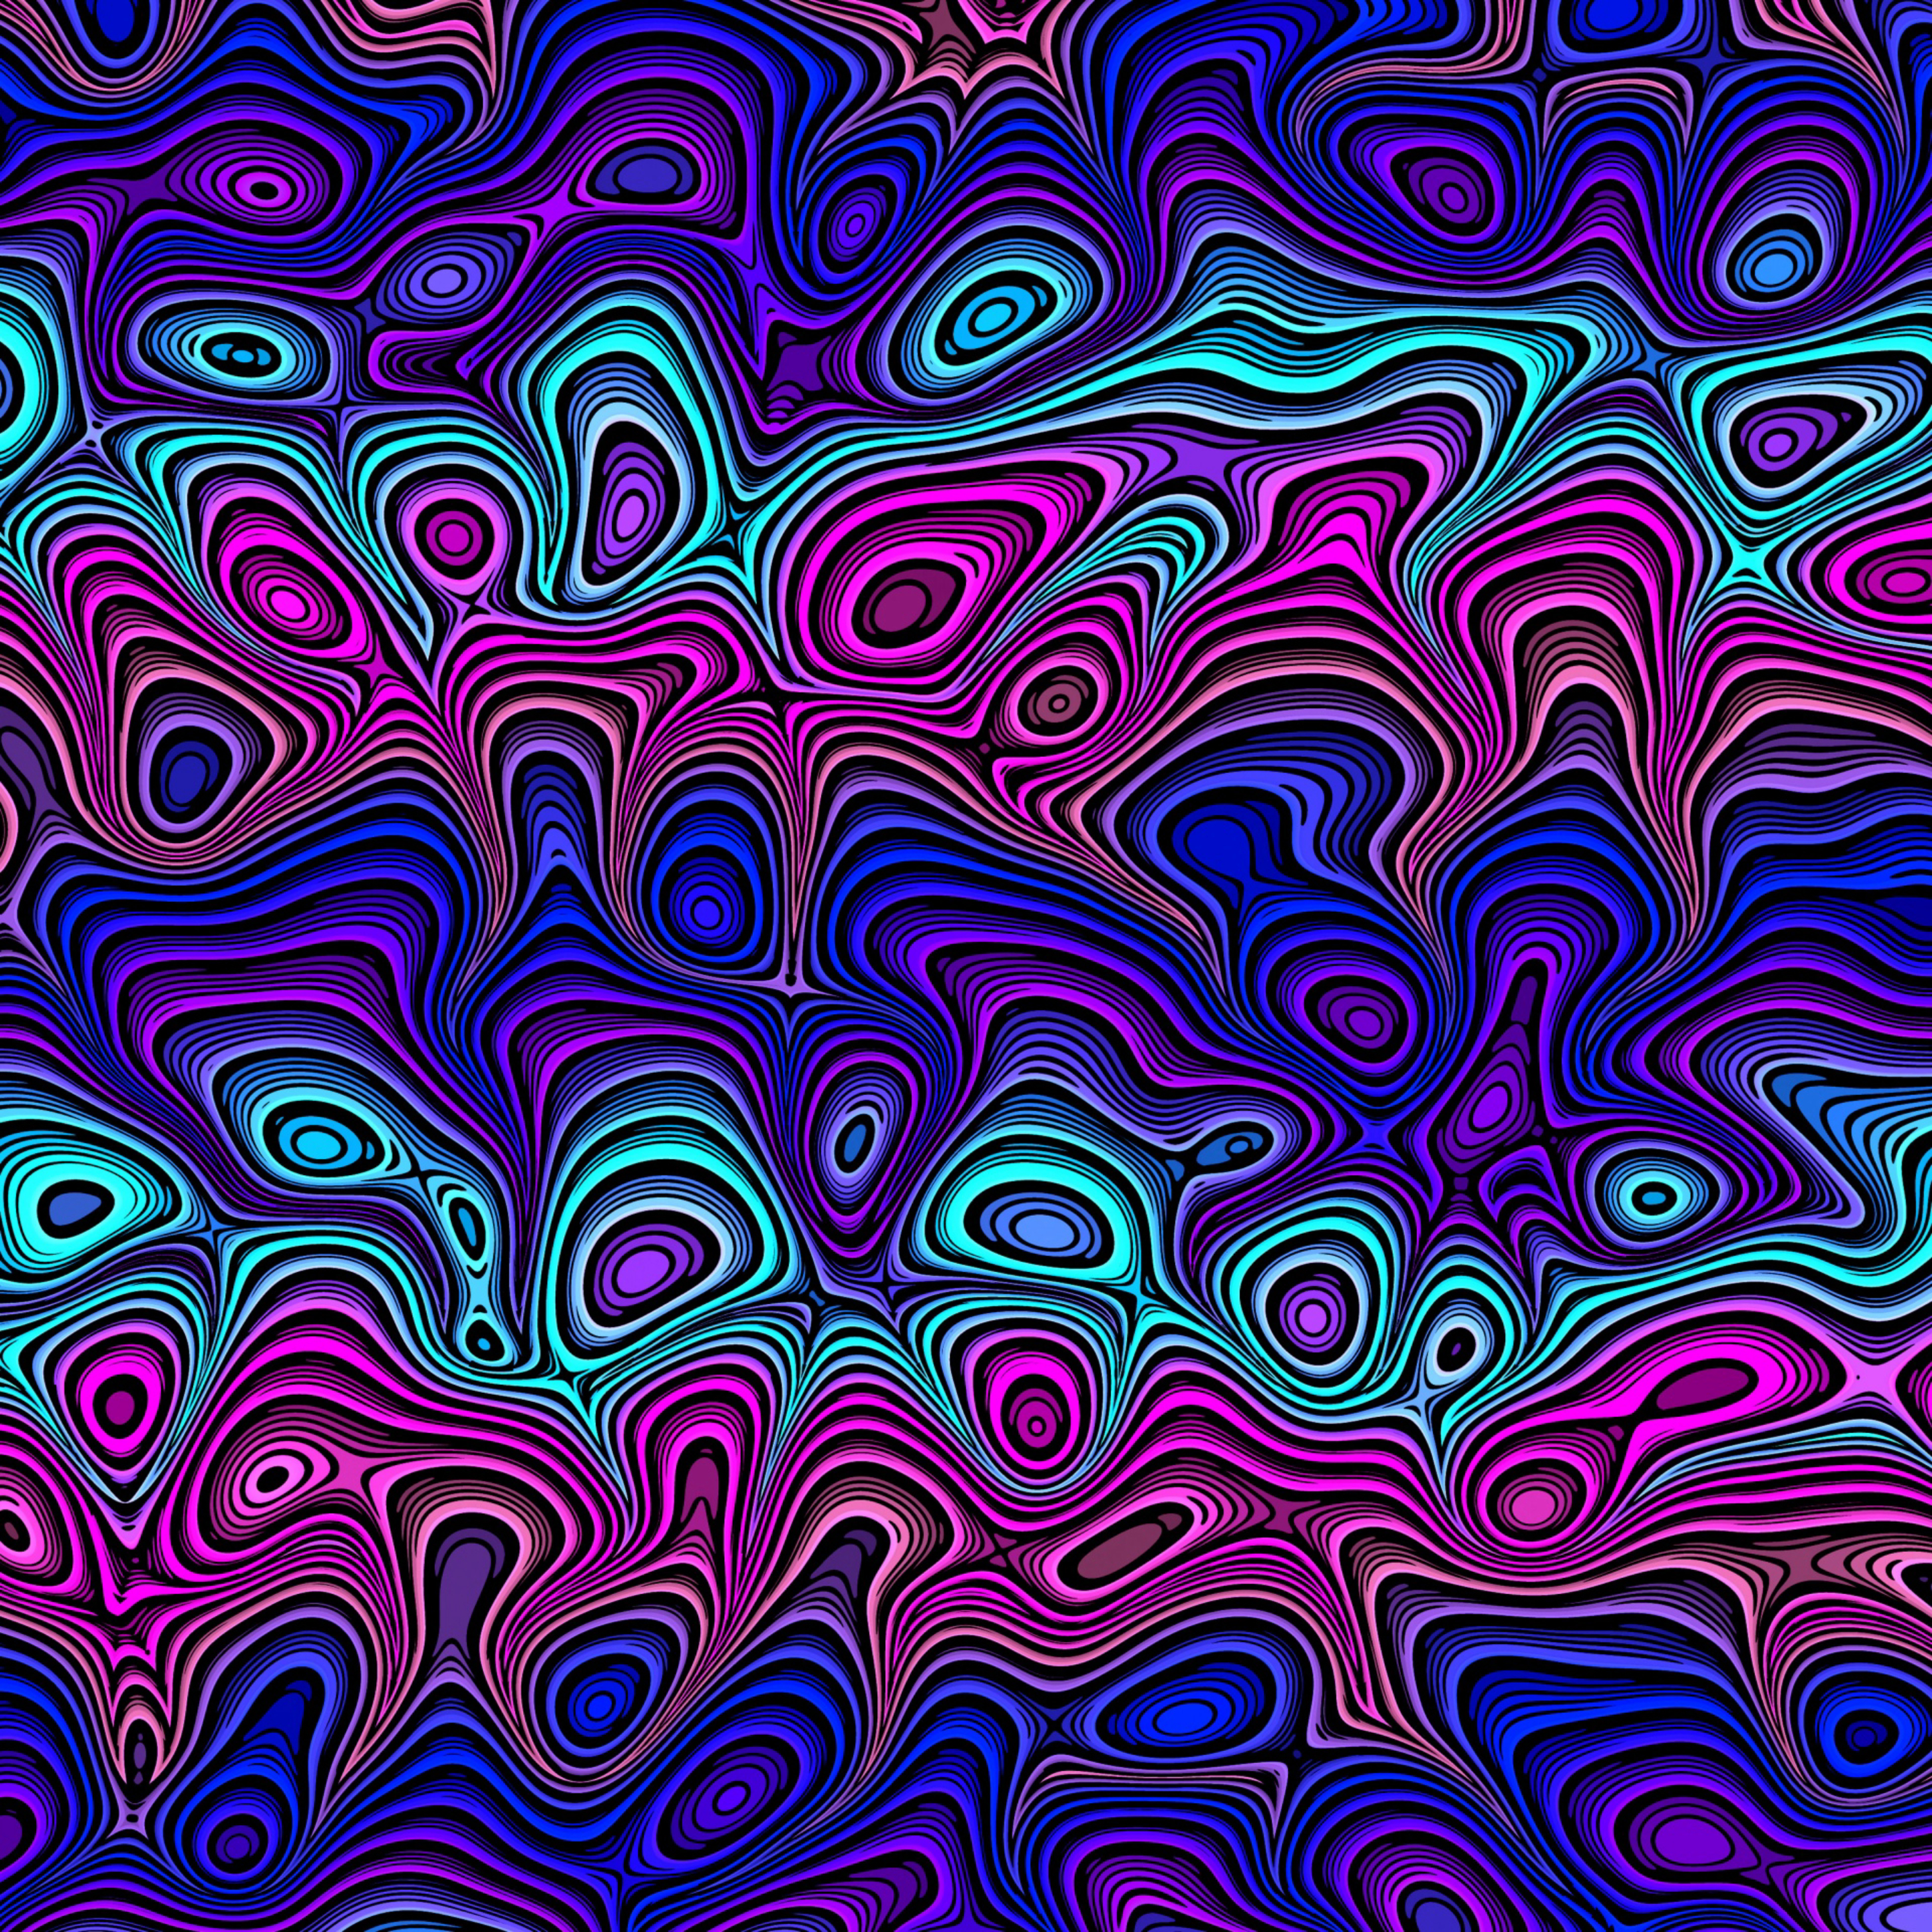 motley, abstract, multicolored, lines, wavy, swirling, involute phone wallpaper